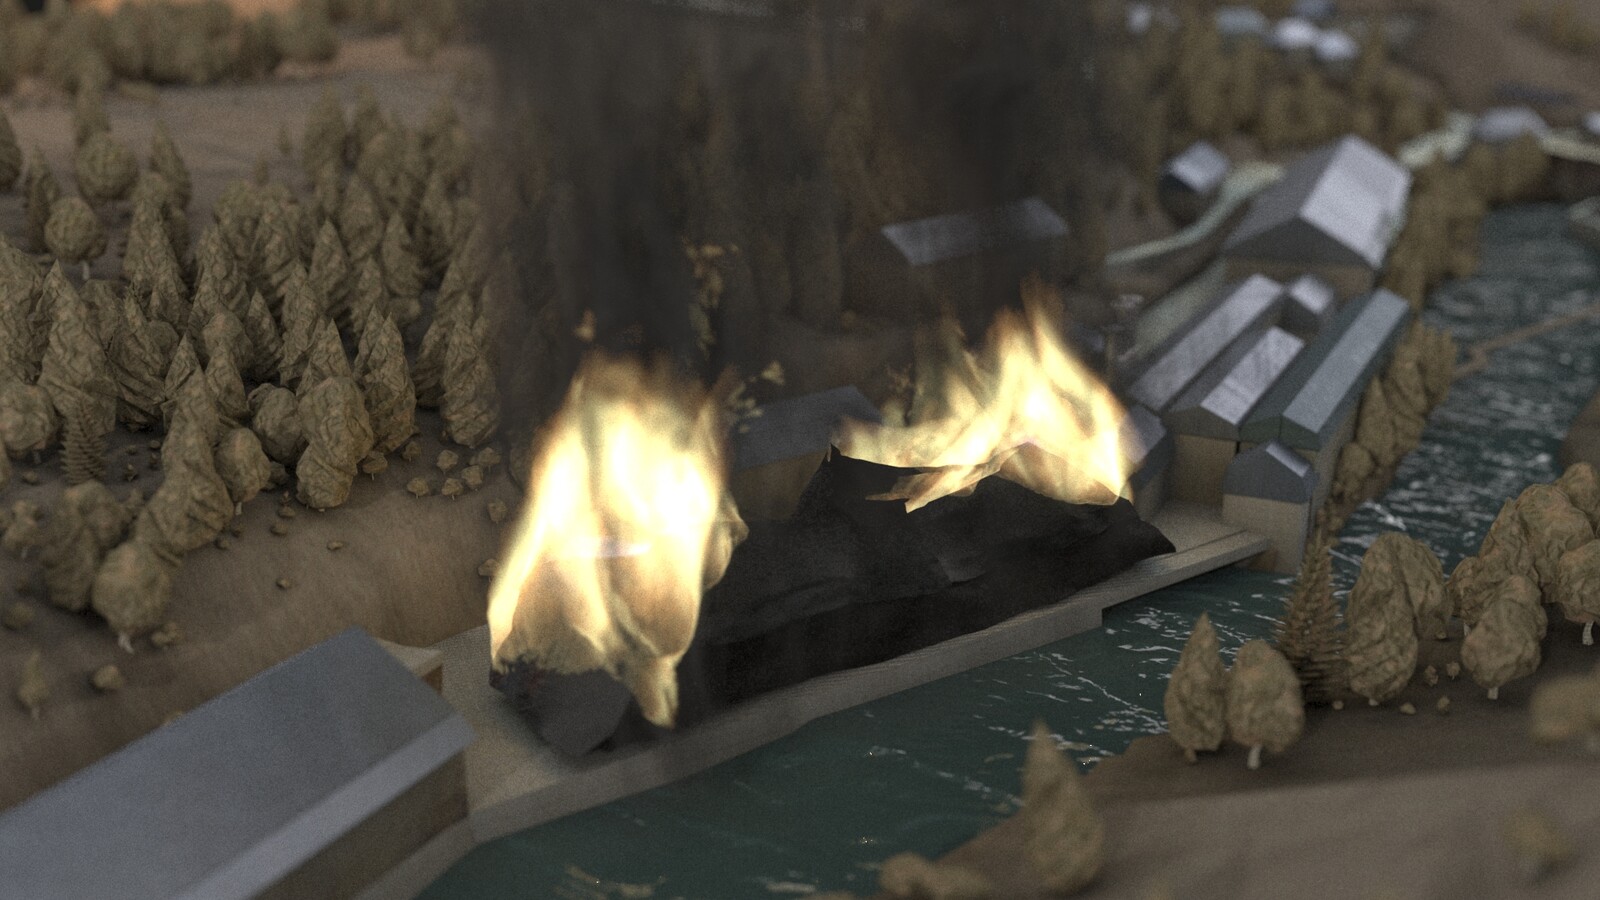 The factory caught fire, I had to simulate paper burning